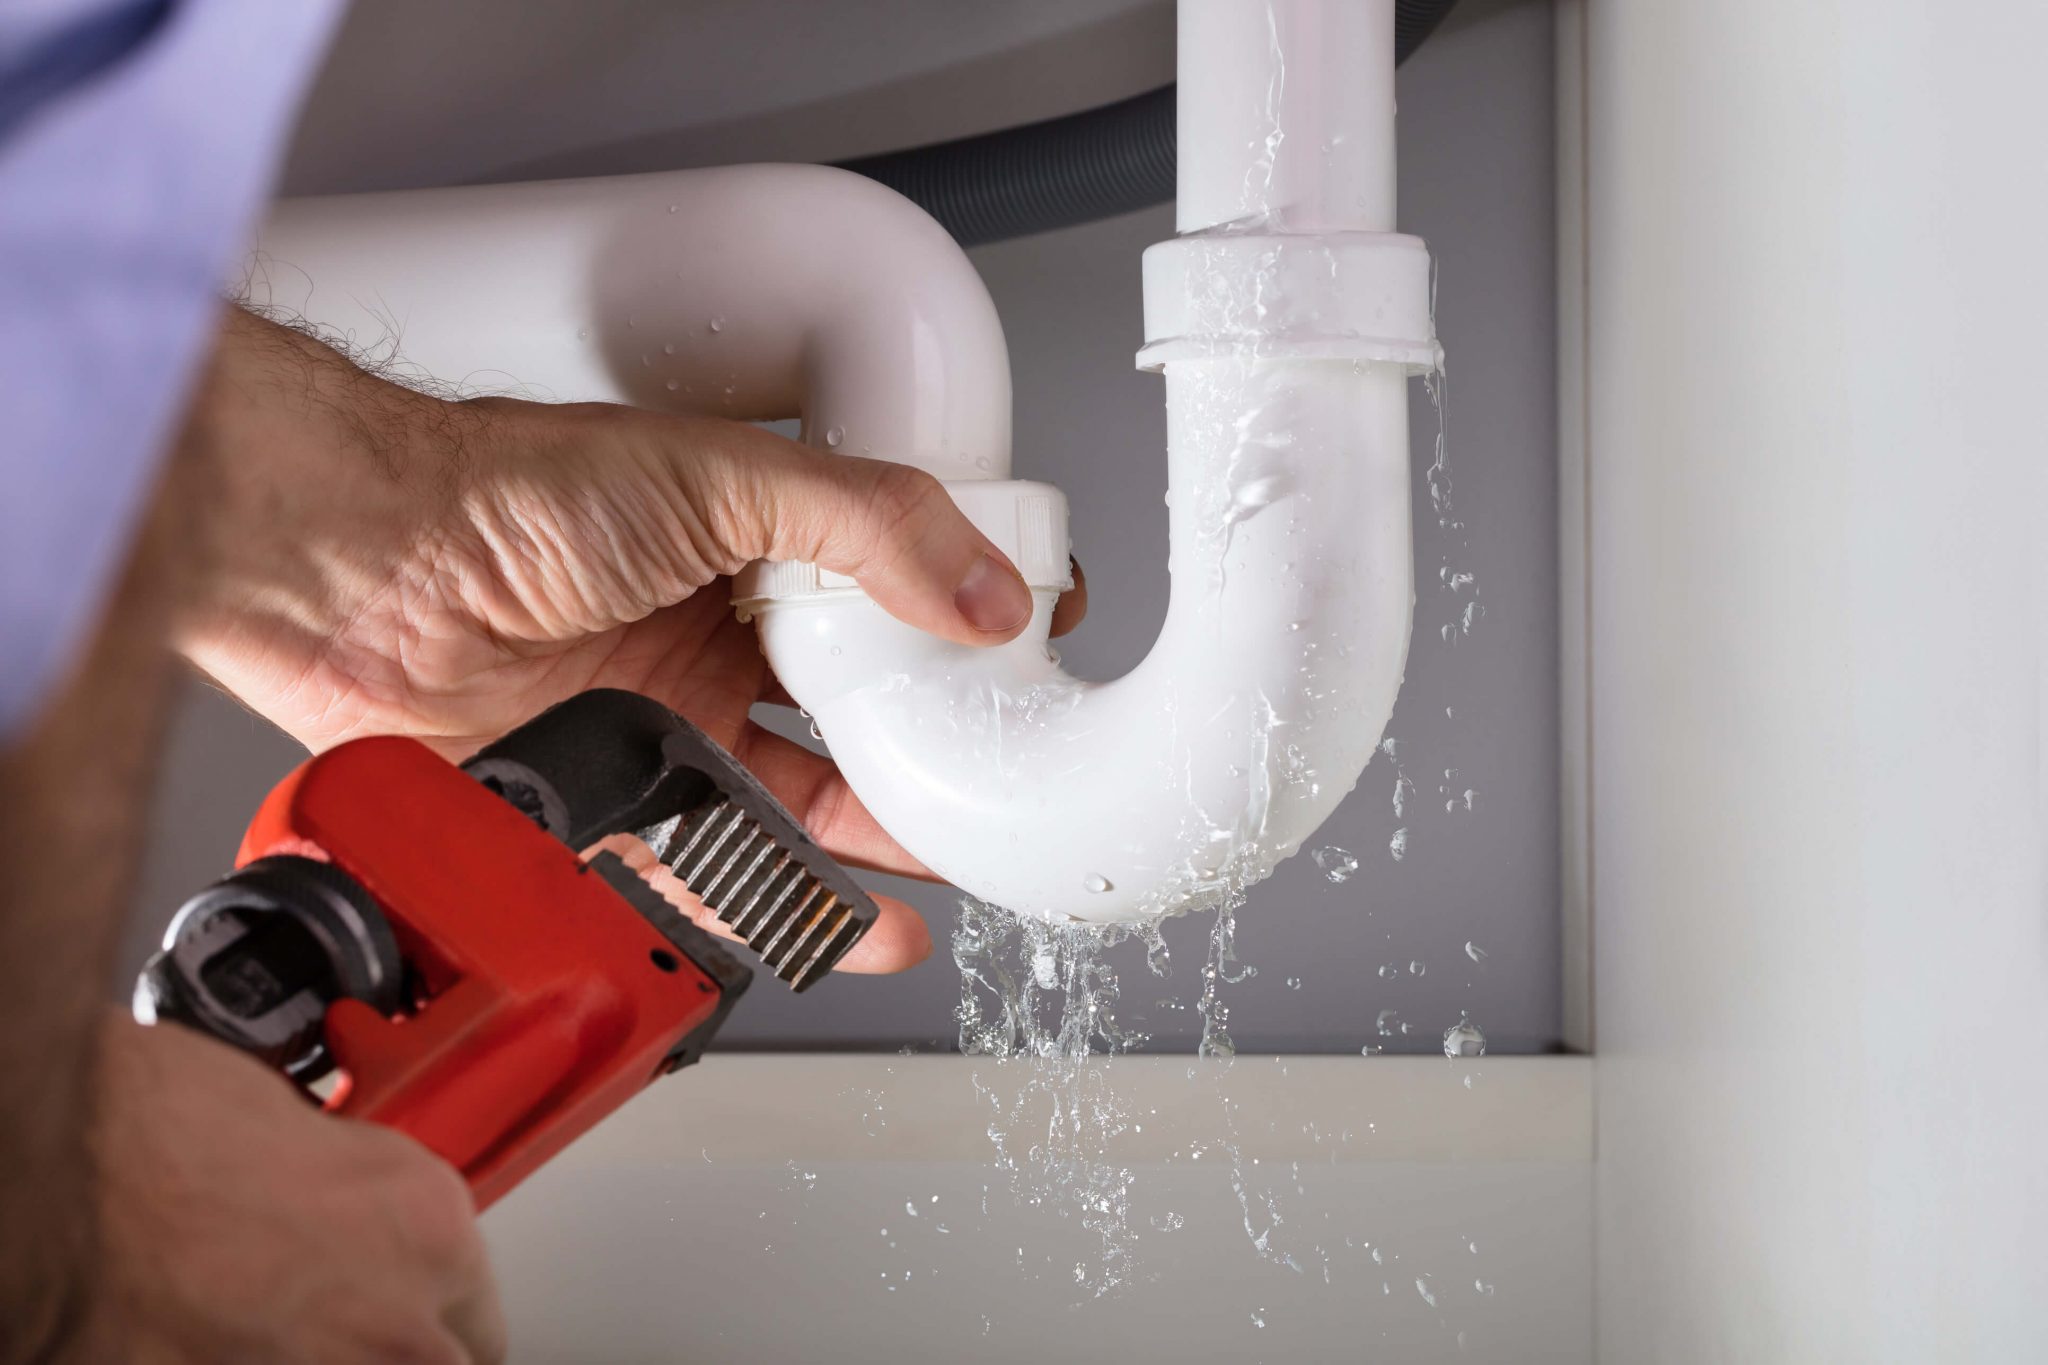 home plumbing services